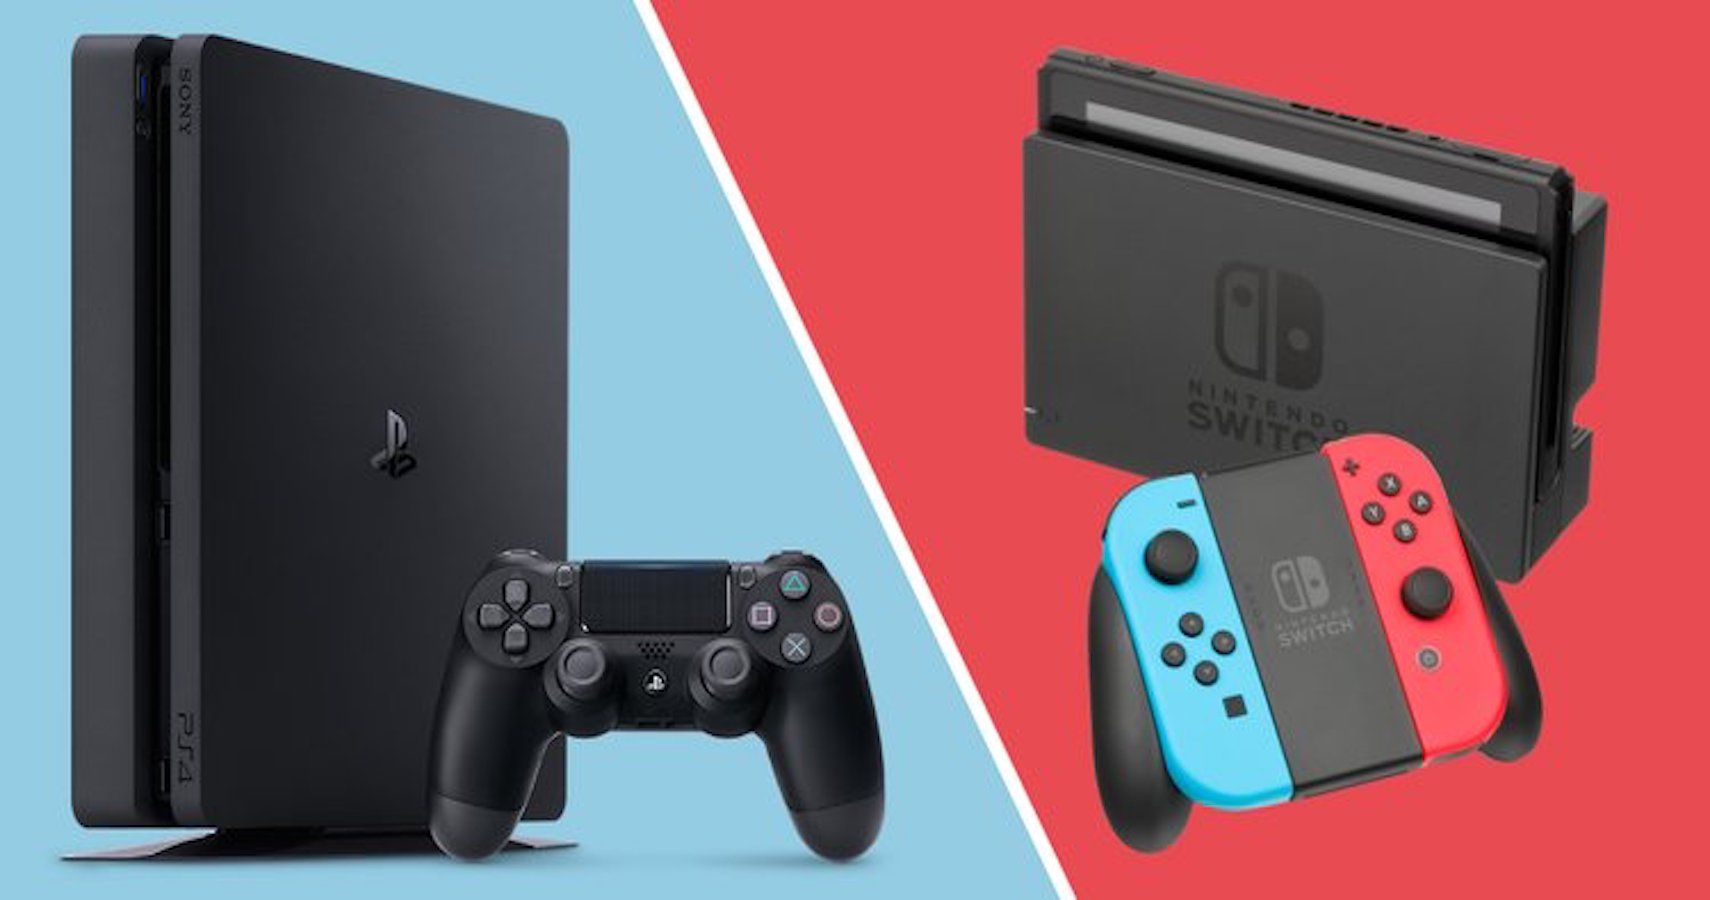 Walmart Leaks Black Friday Prices On Switch Lite, PS4 Pro